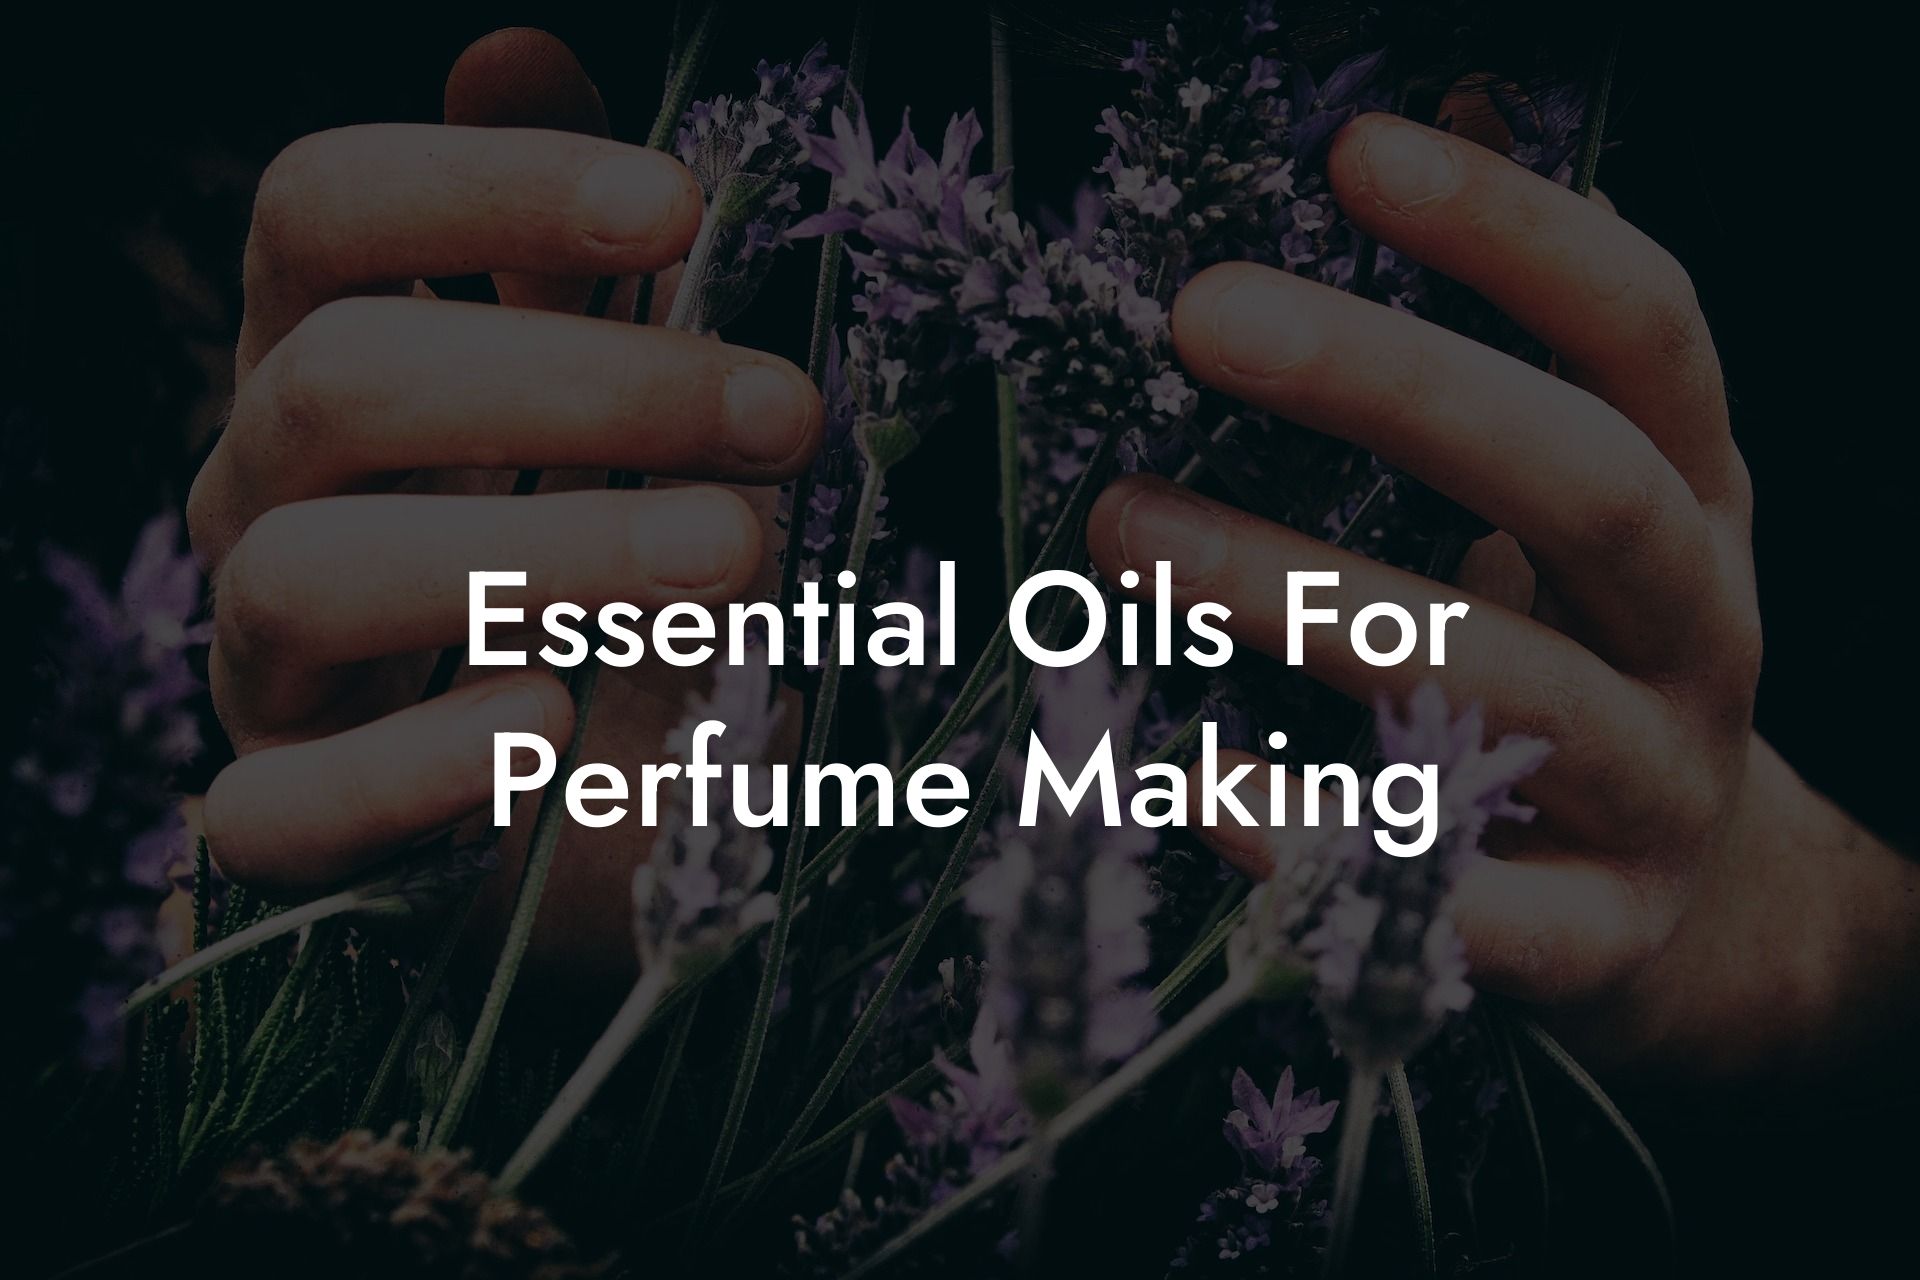 Essential Oils For Perfume Making